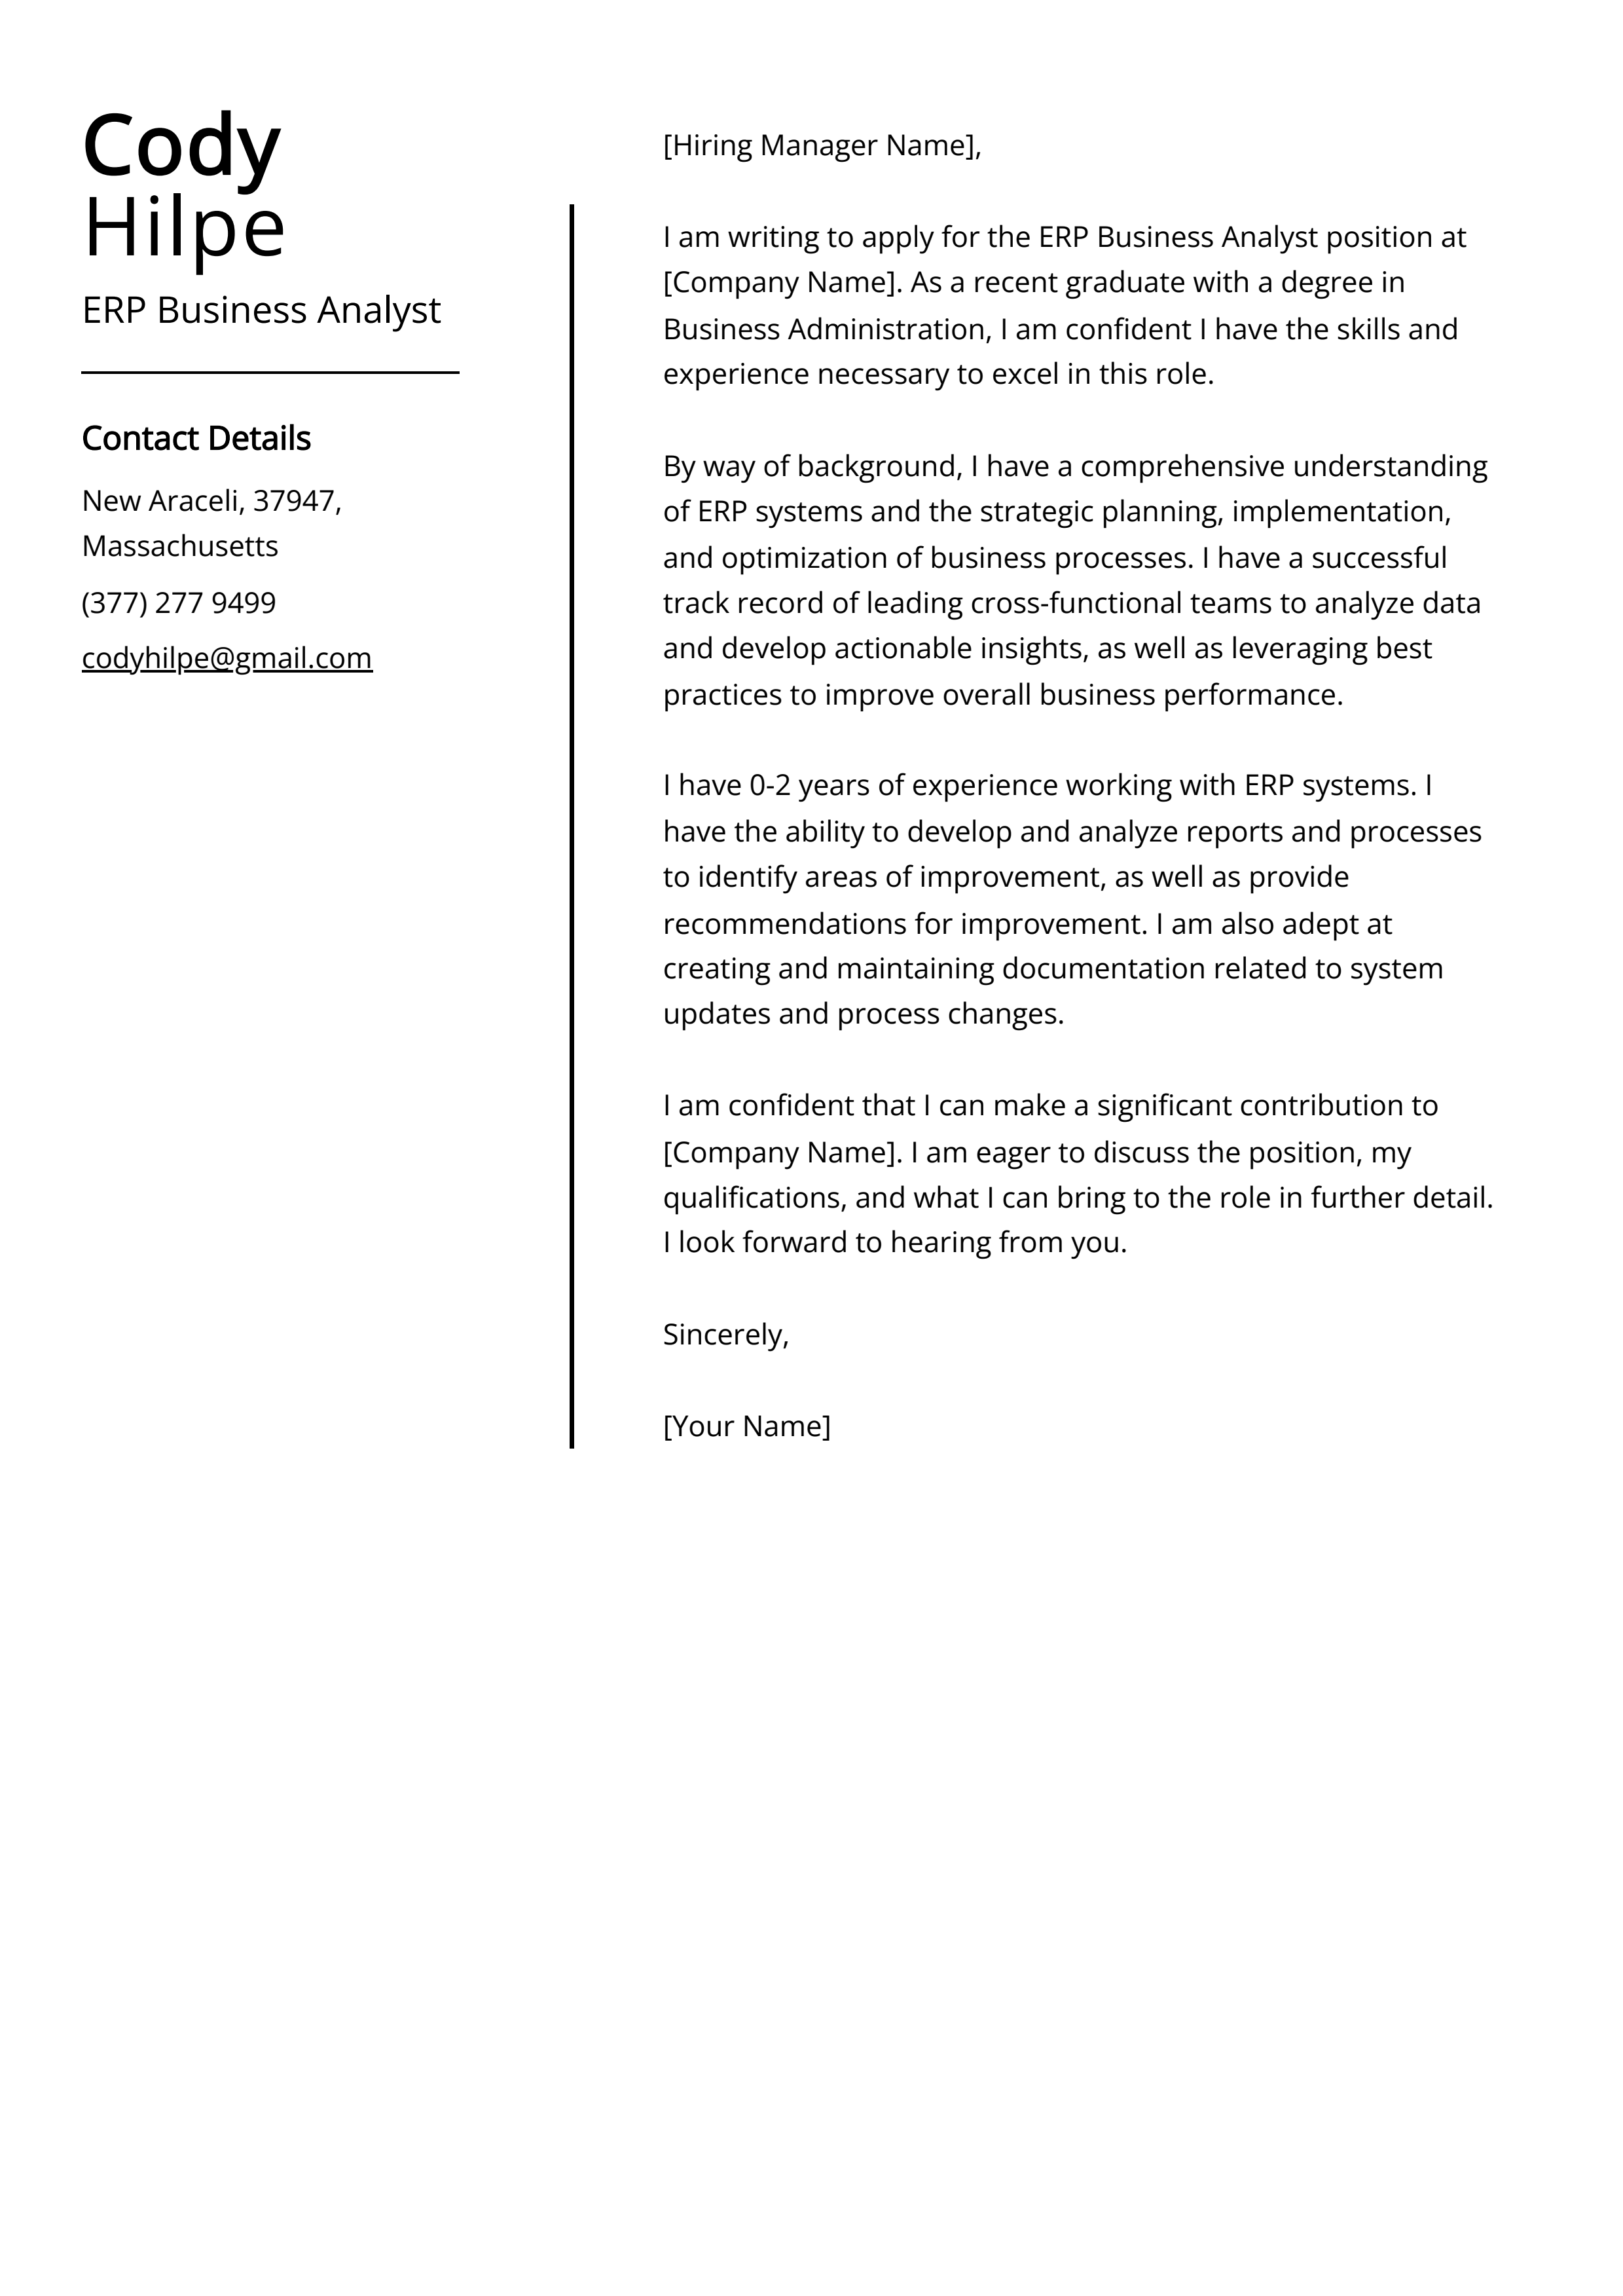 ERP Business Analyst Cover Letter Example